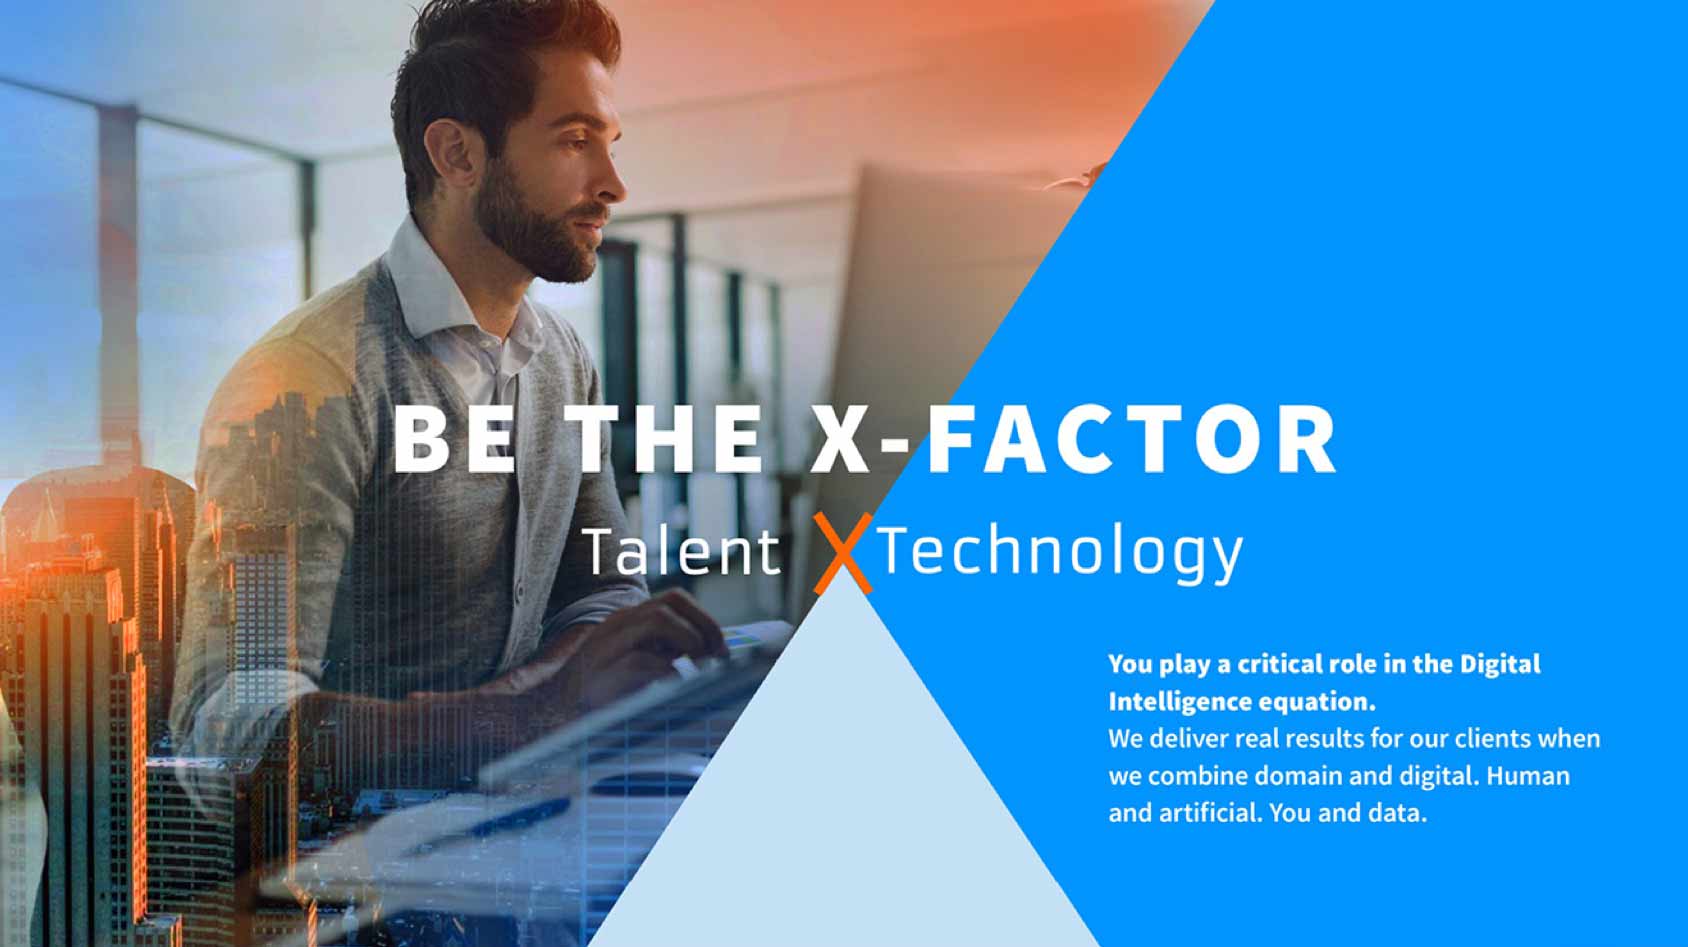 web page man sitting at computer overlaid words "be the x-factor"